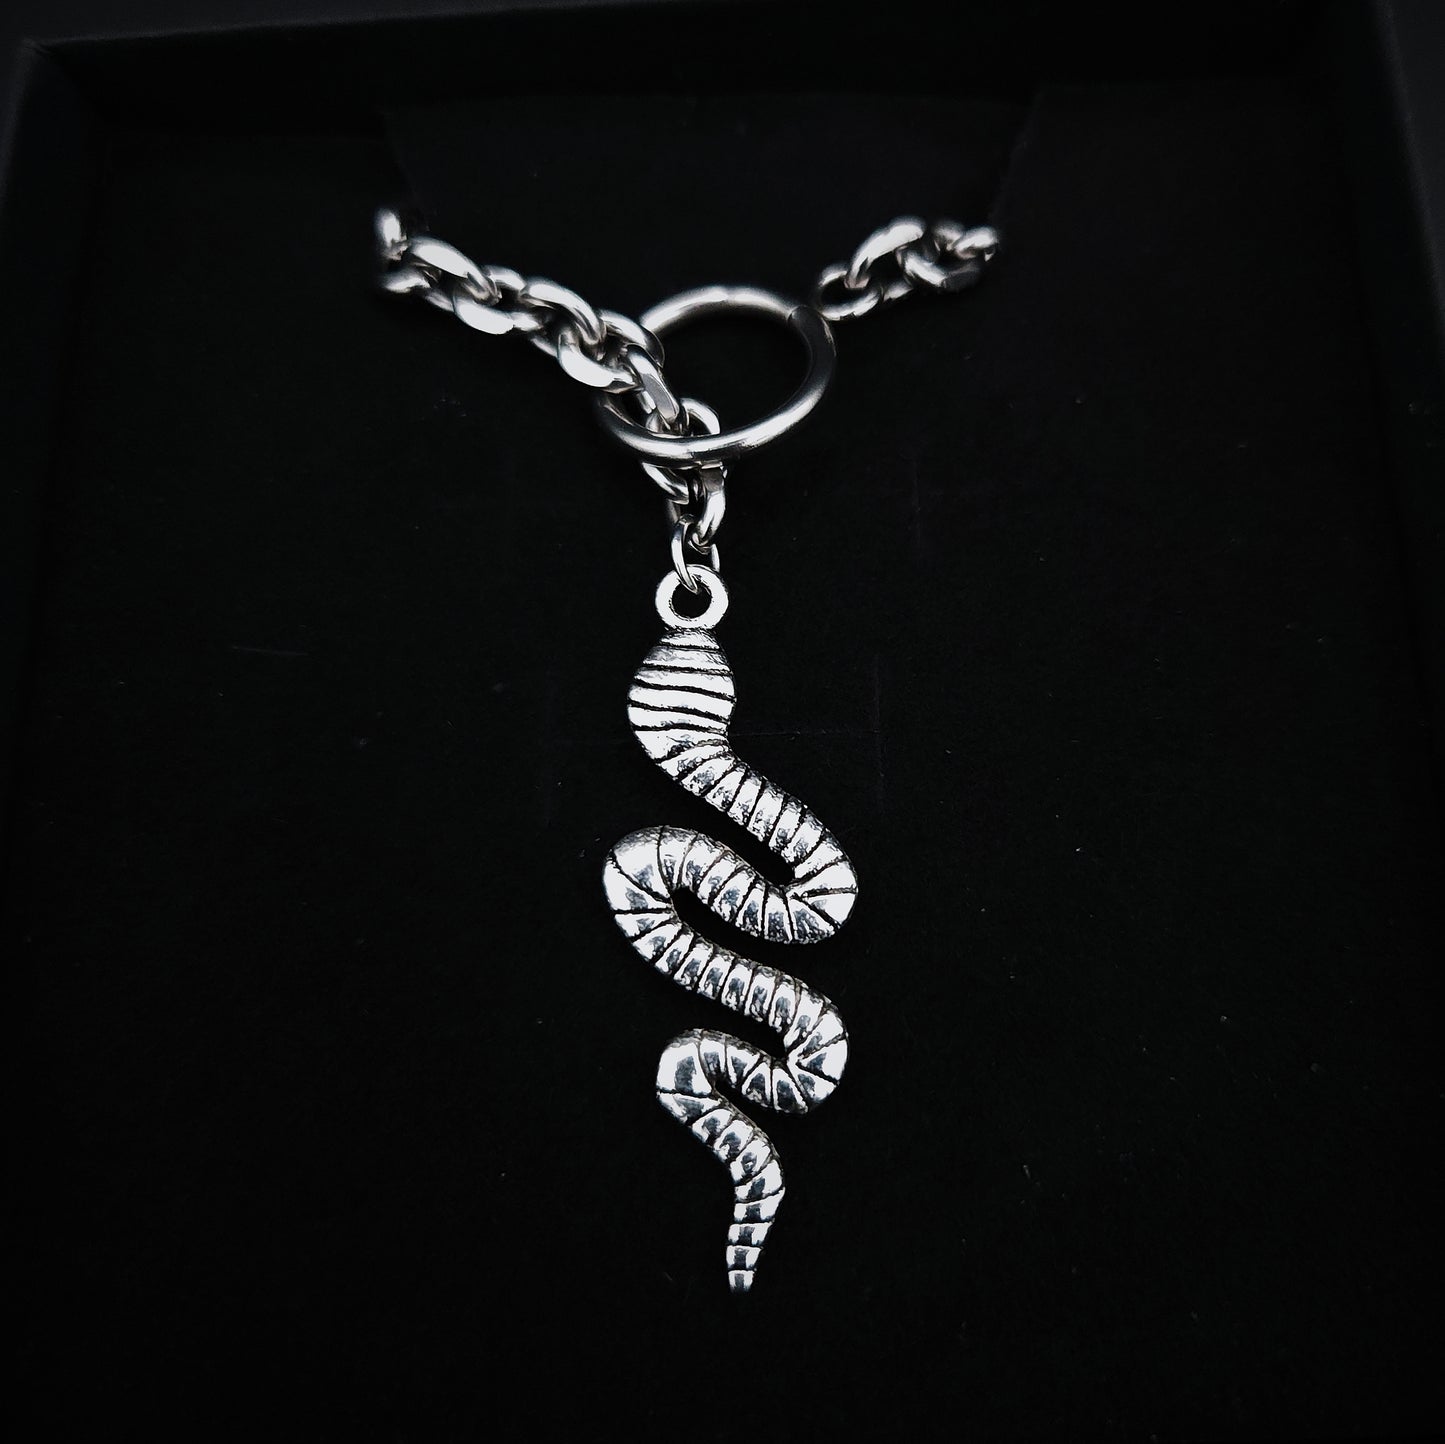 Serpent Toggle Chain Necklace